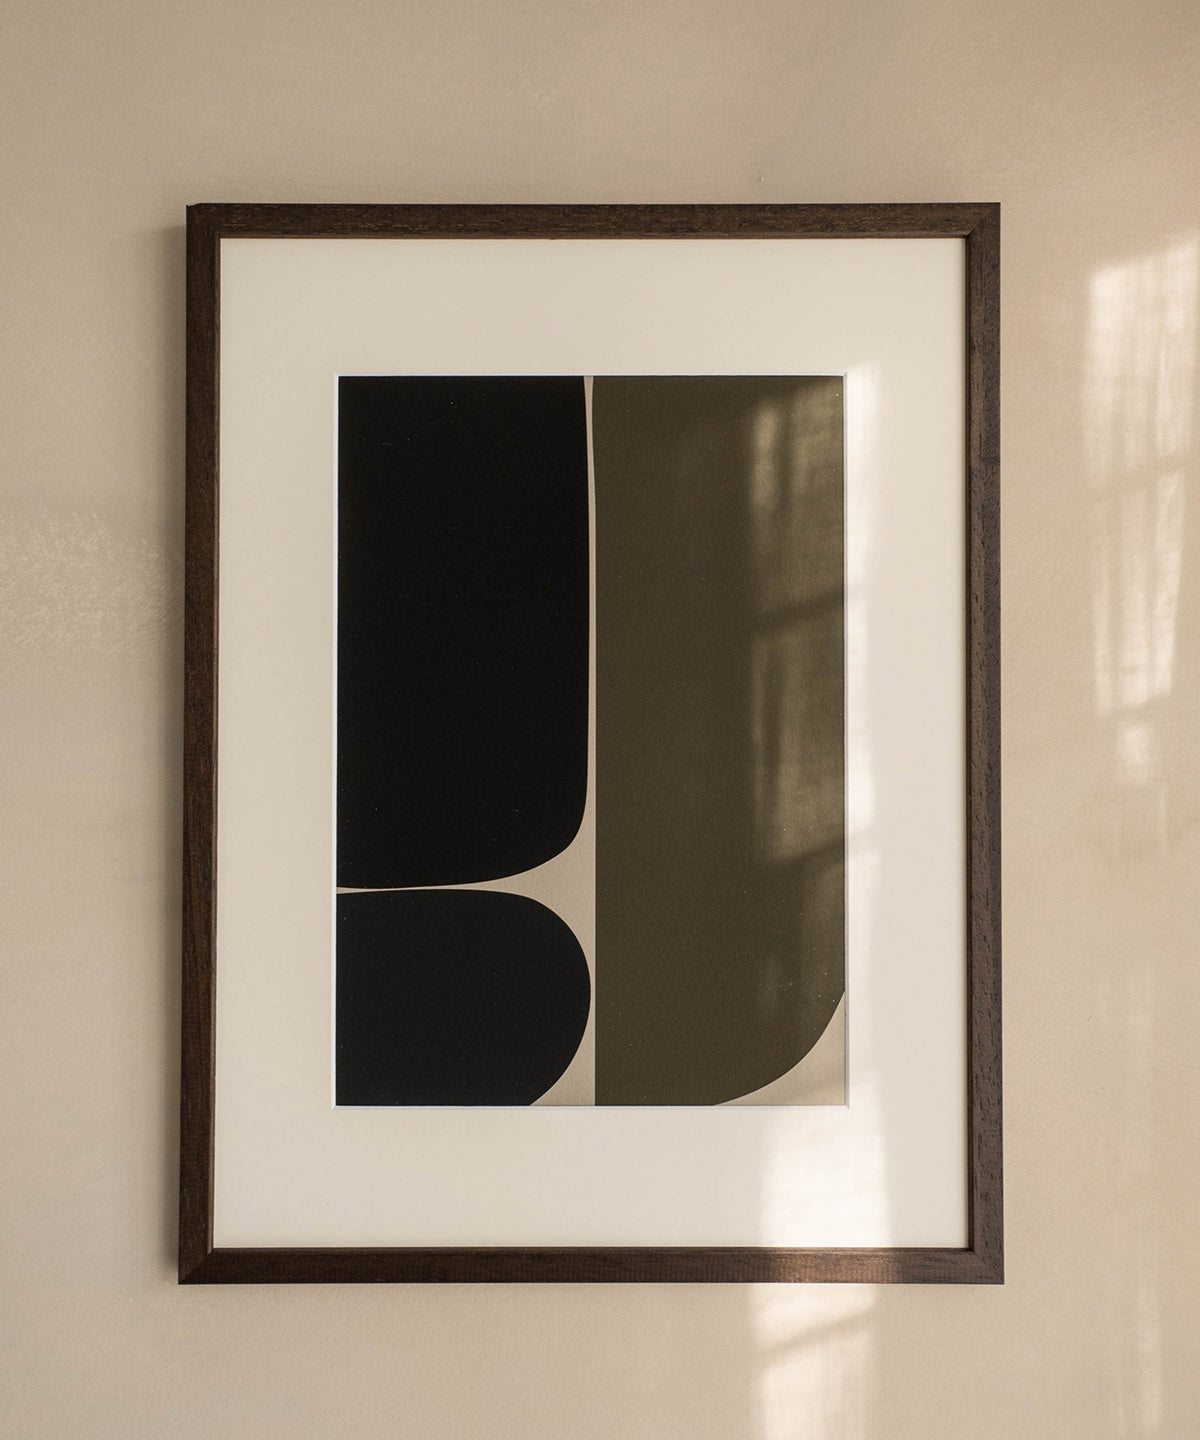 James, a Giclée print in several sizes. Design by Edith Beurskens